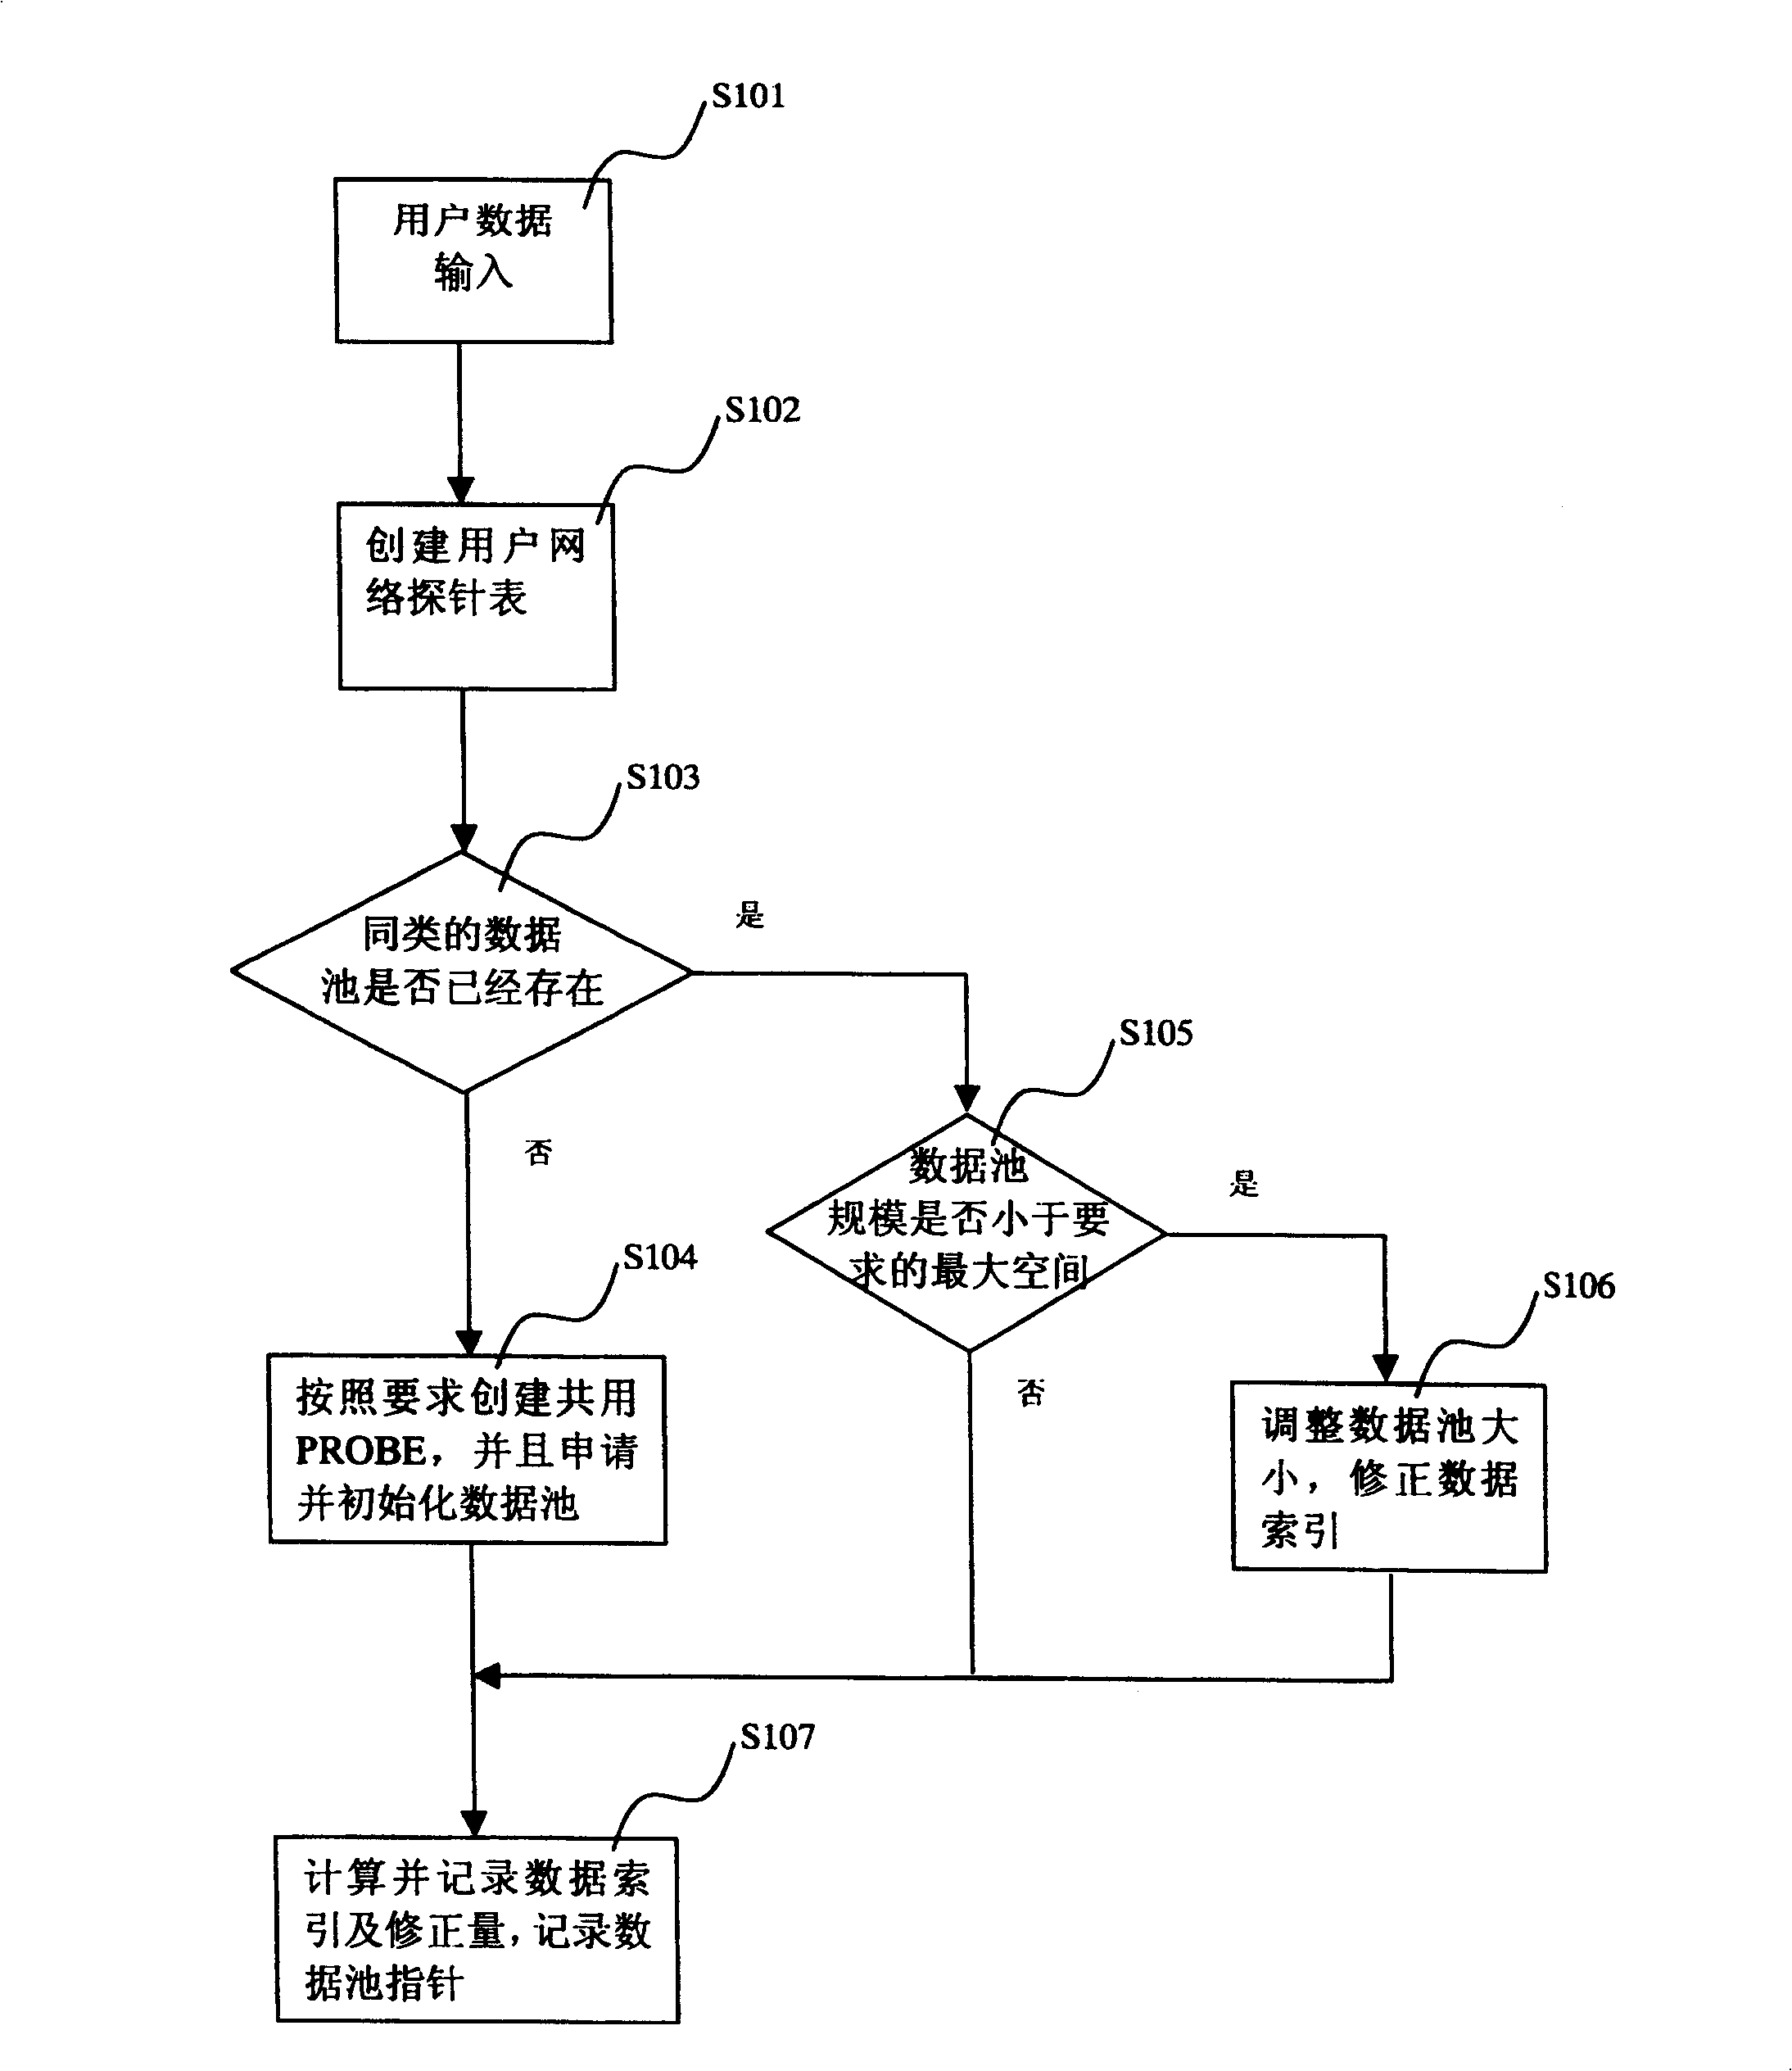 Method for dynamic real time capturing logic commands input from UNIX terminal user